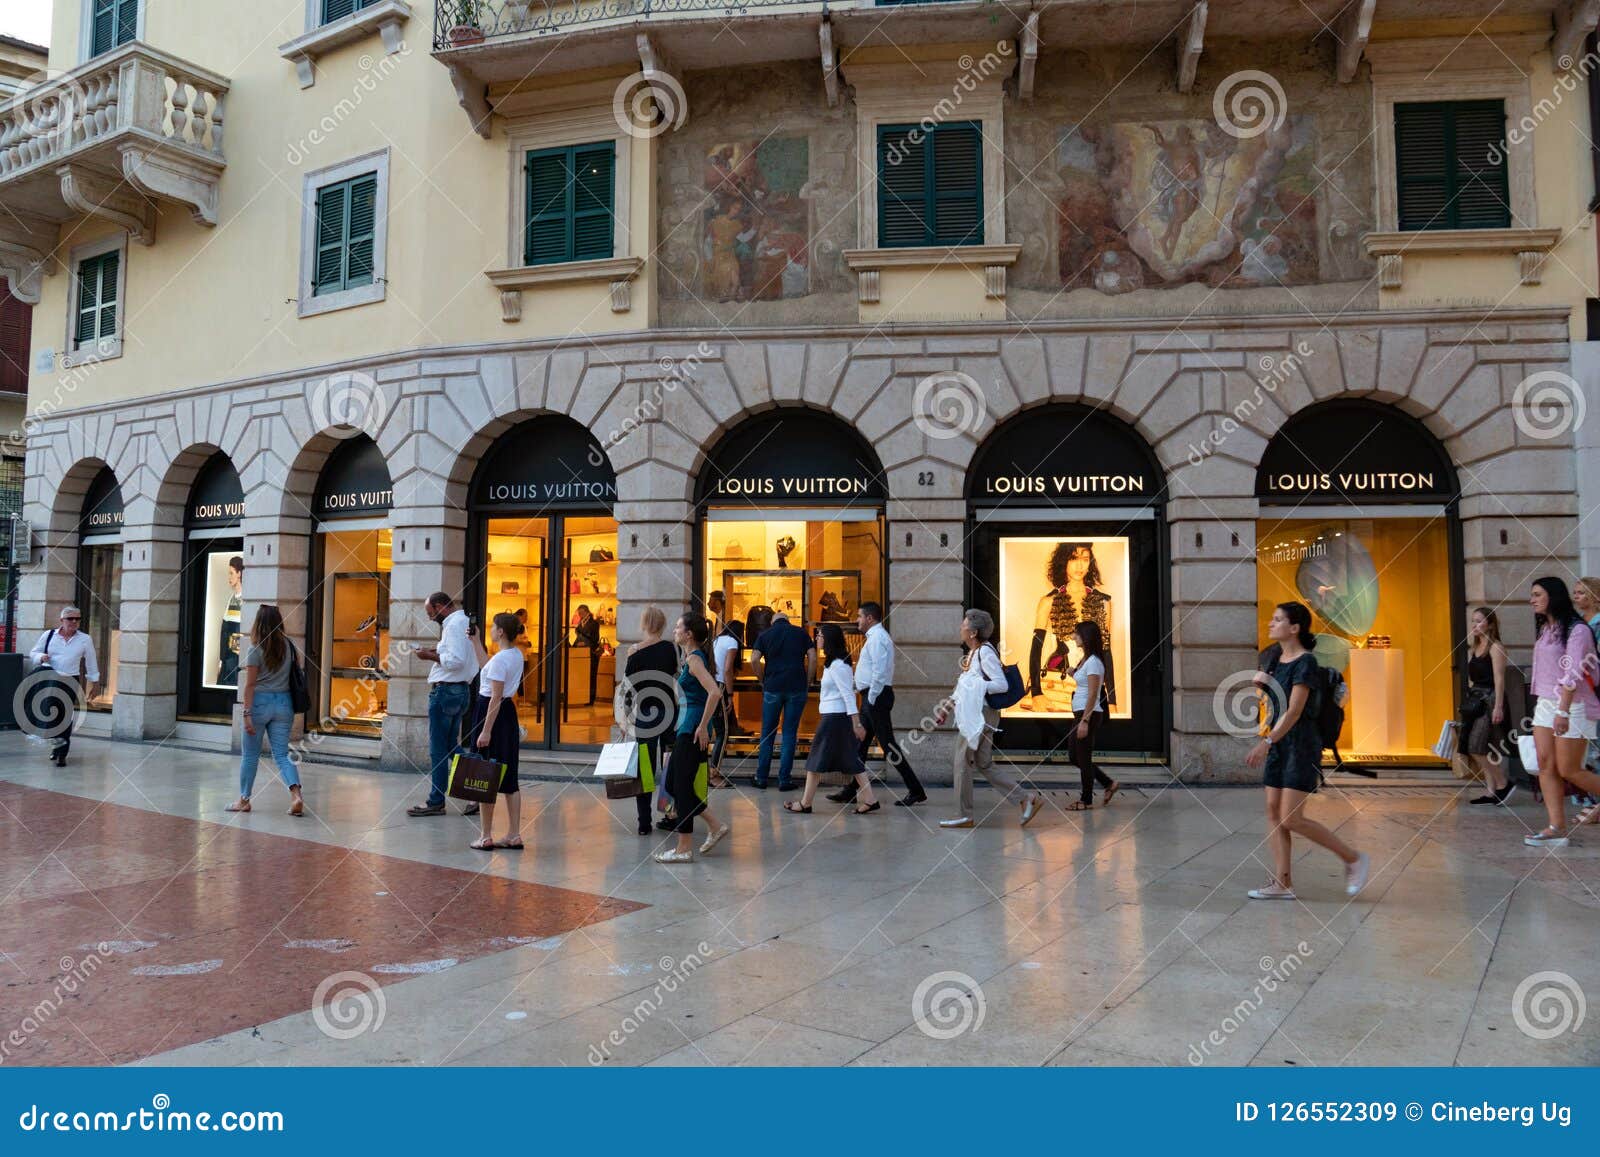 Louis Vuitton Store In Verona, Italy Editorial Stock Image - Image of business, centre: 126552309